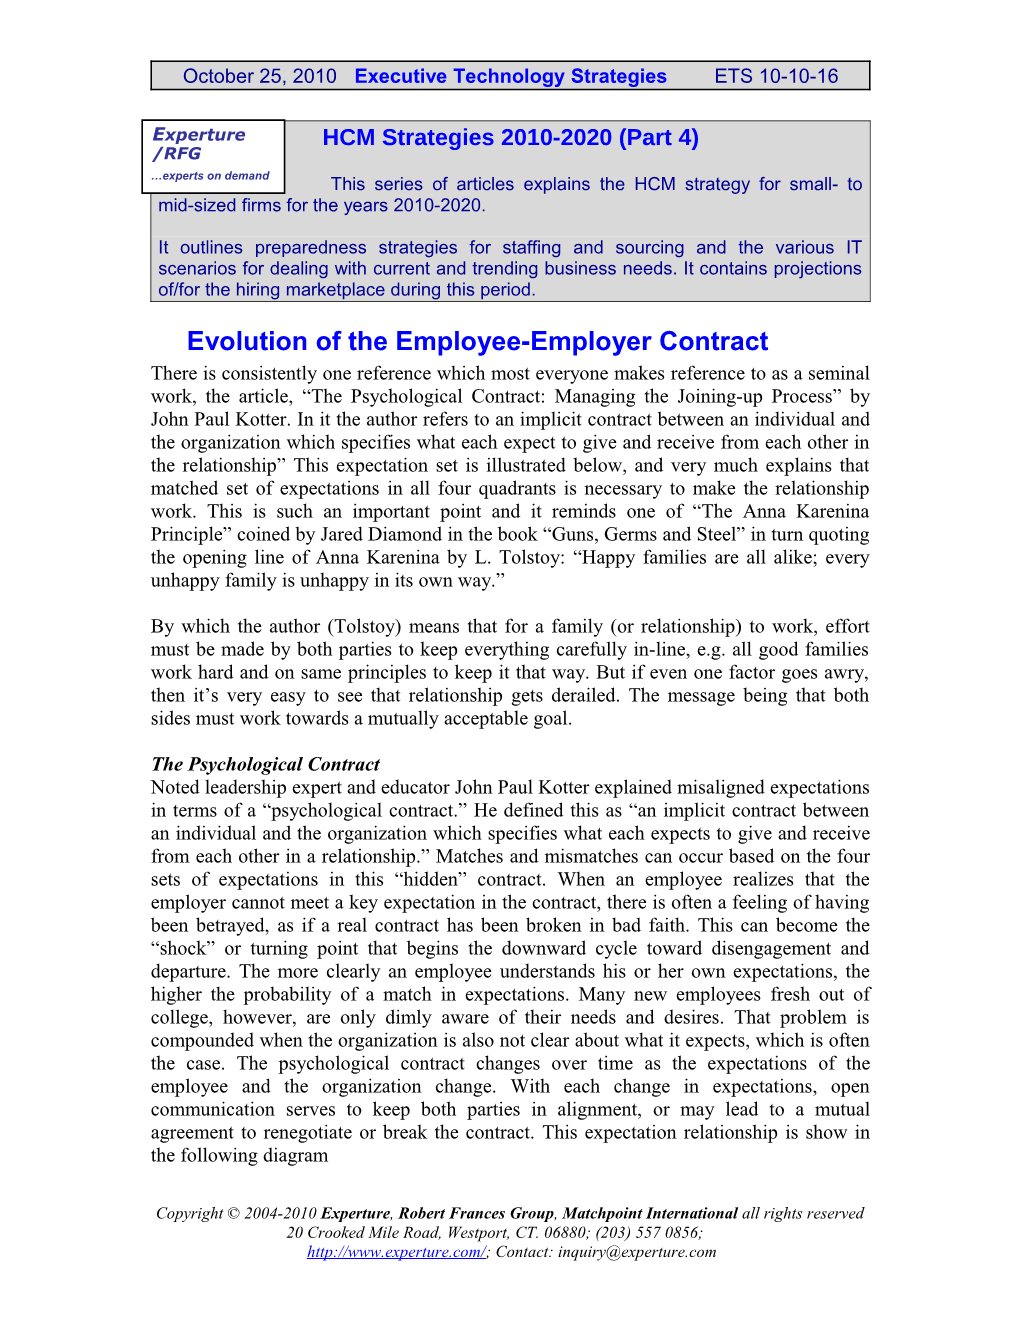 Evolution of the Employee-Employer Contract